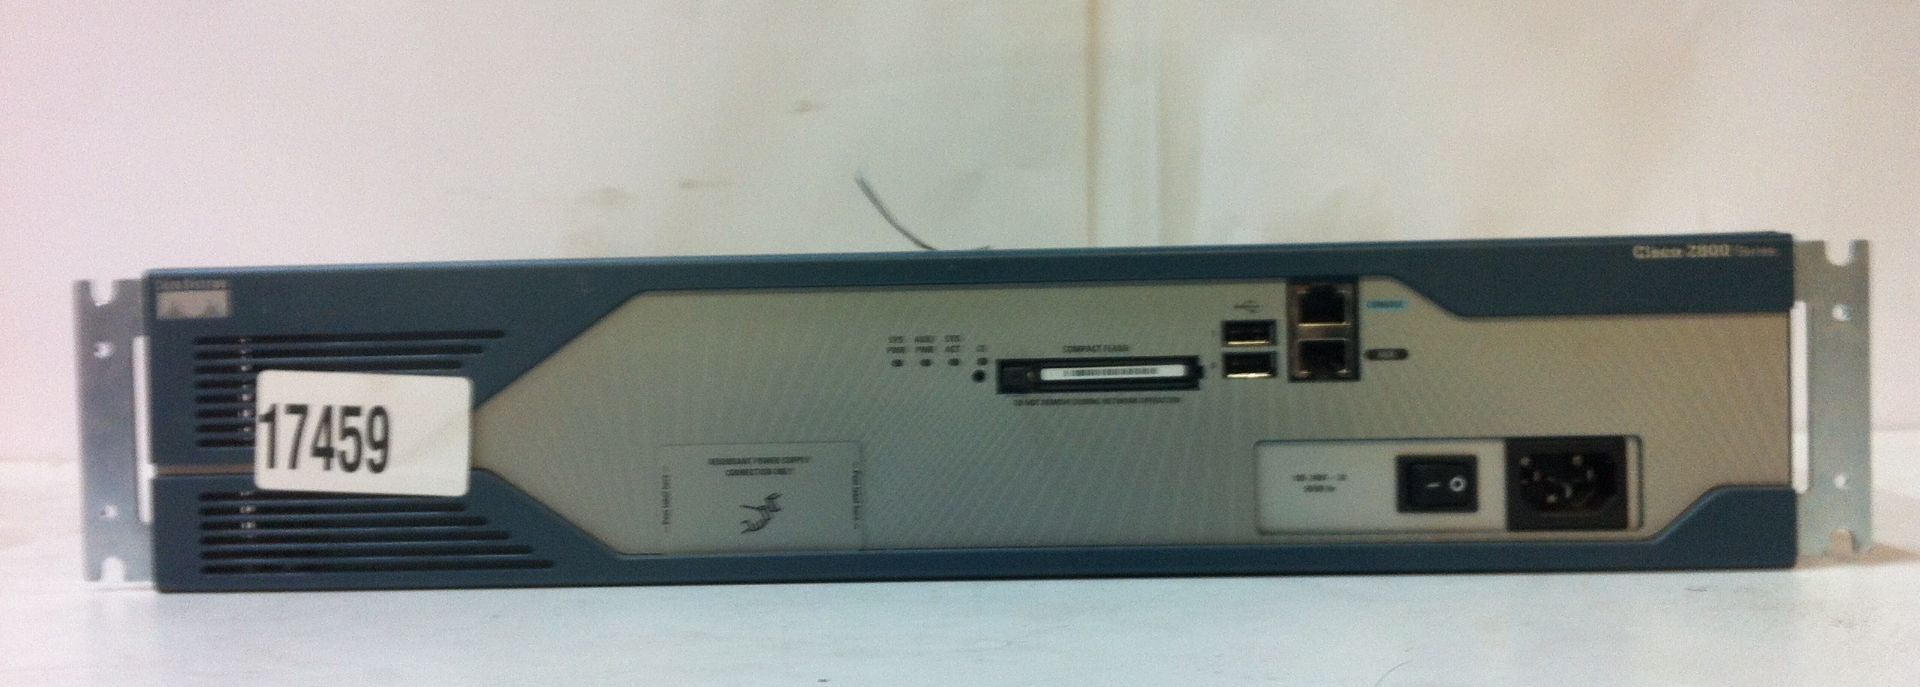 Cisco 2800 Series Router - Image 2 of 4